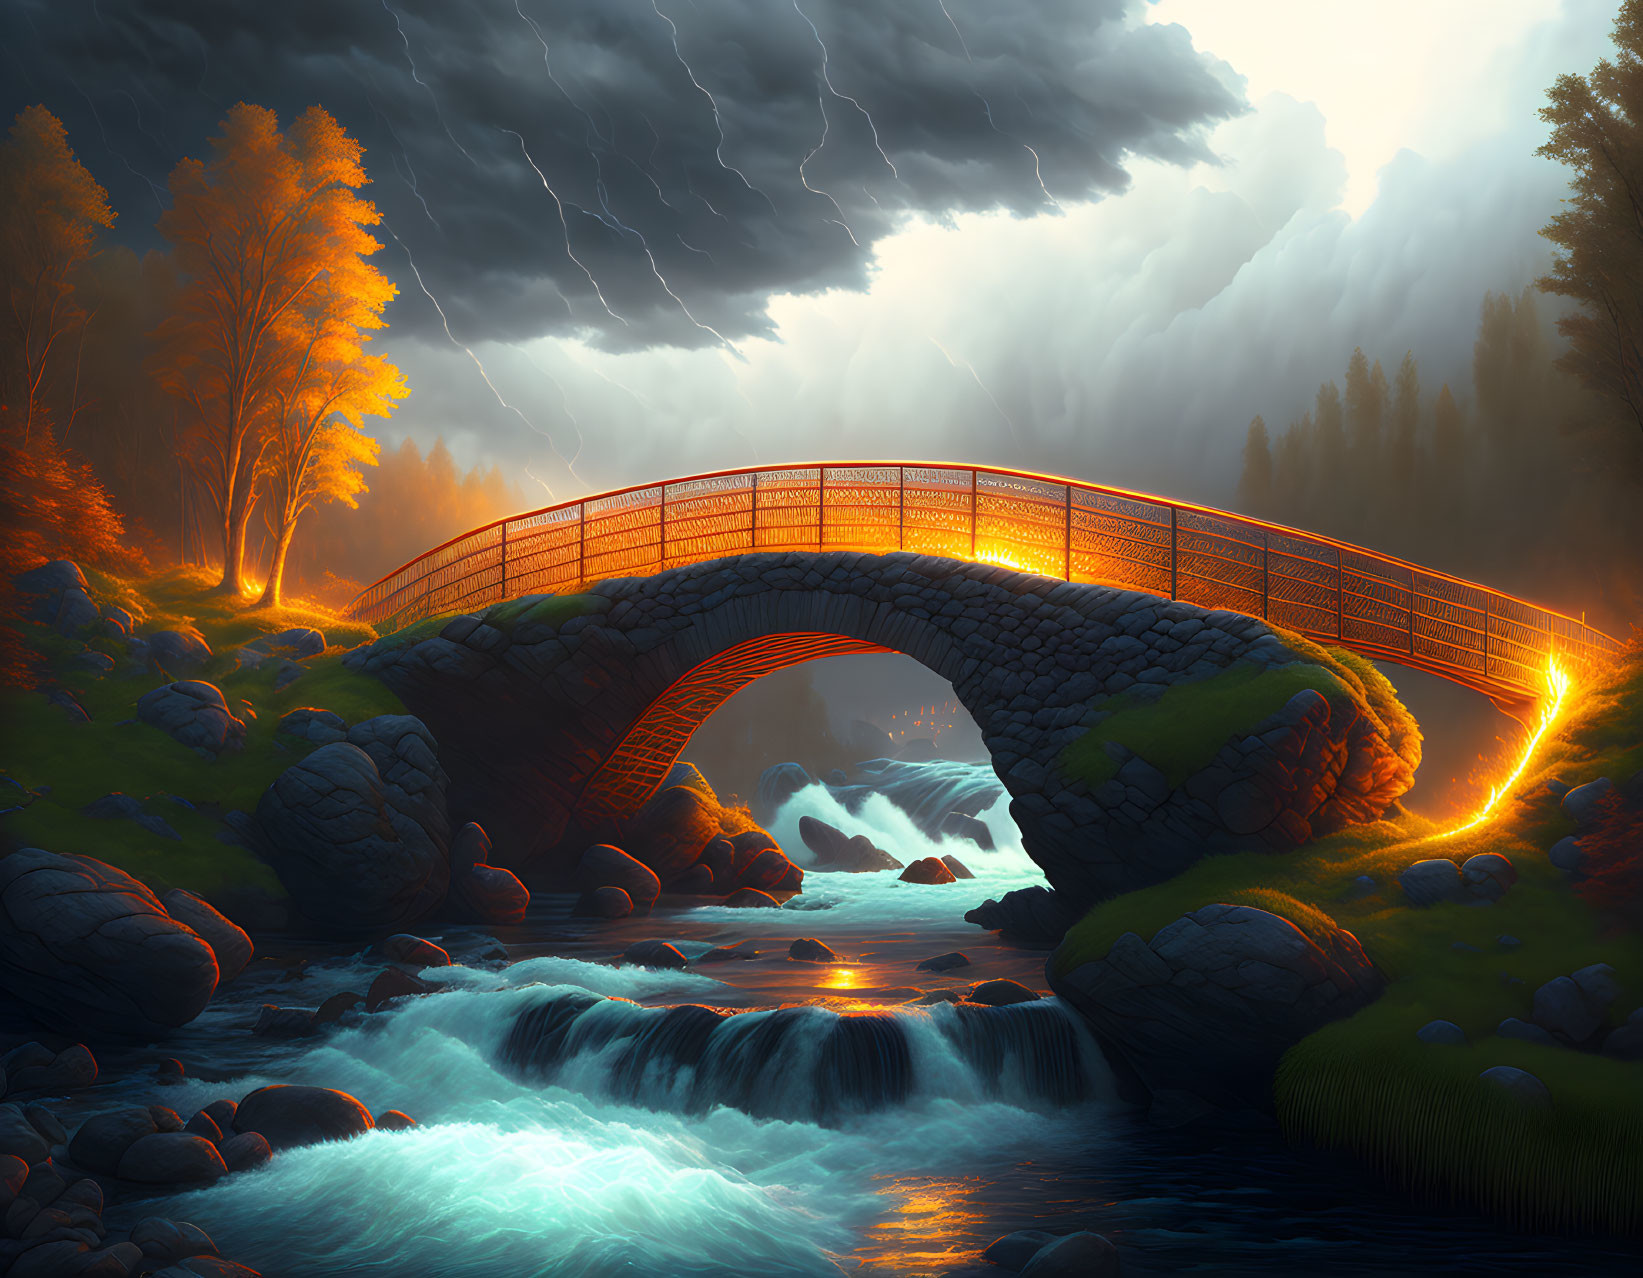 A lighted burning bridge over a wild,